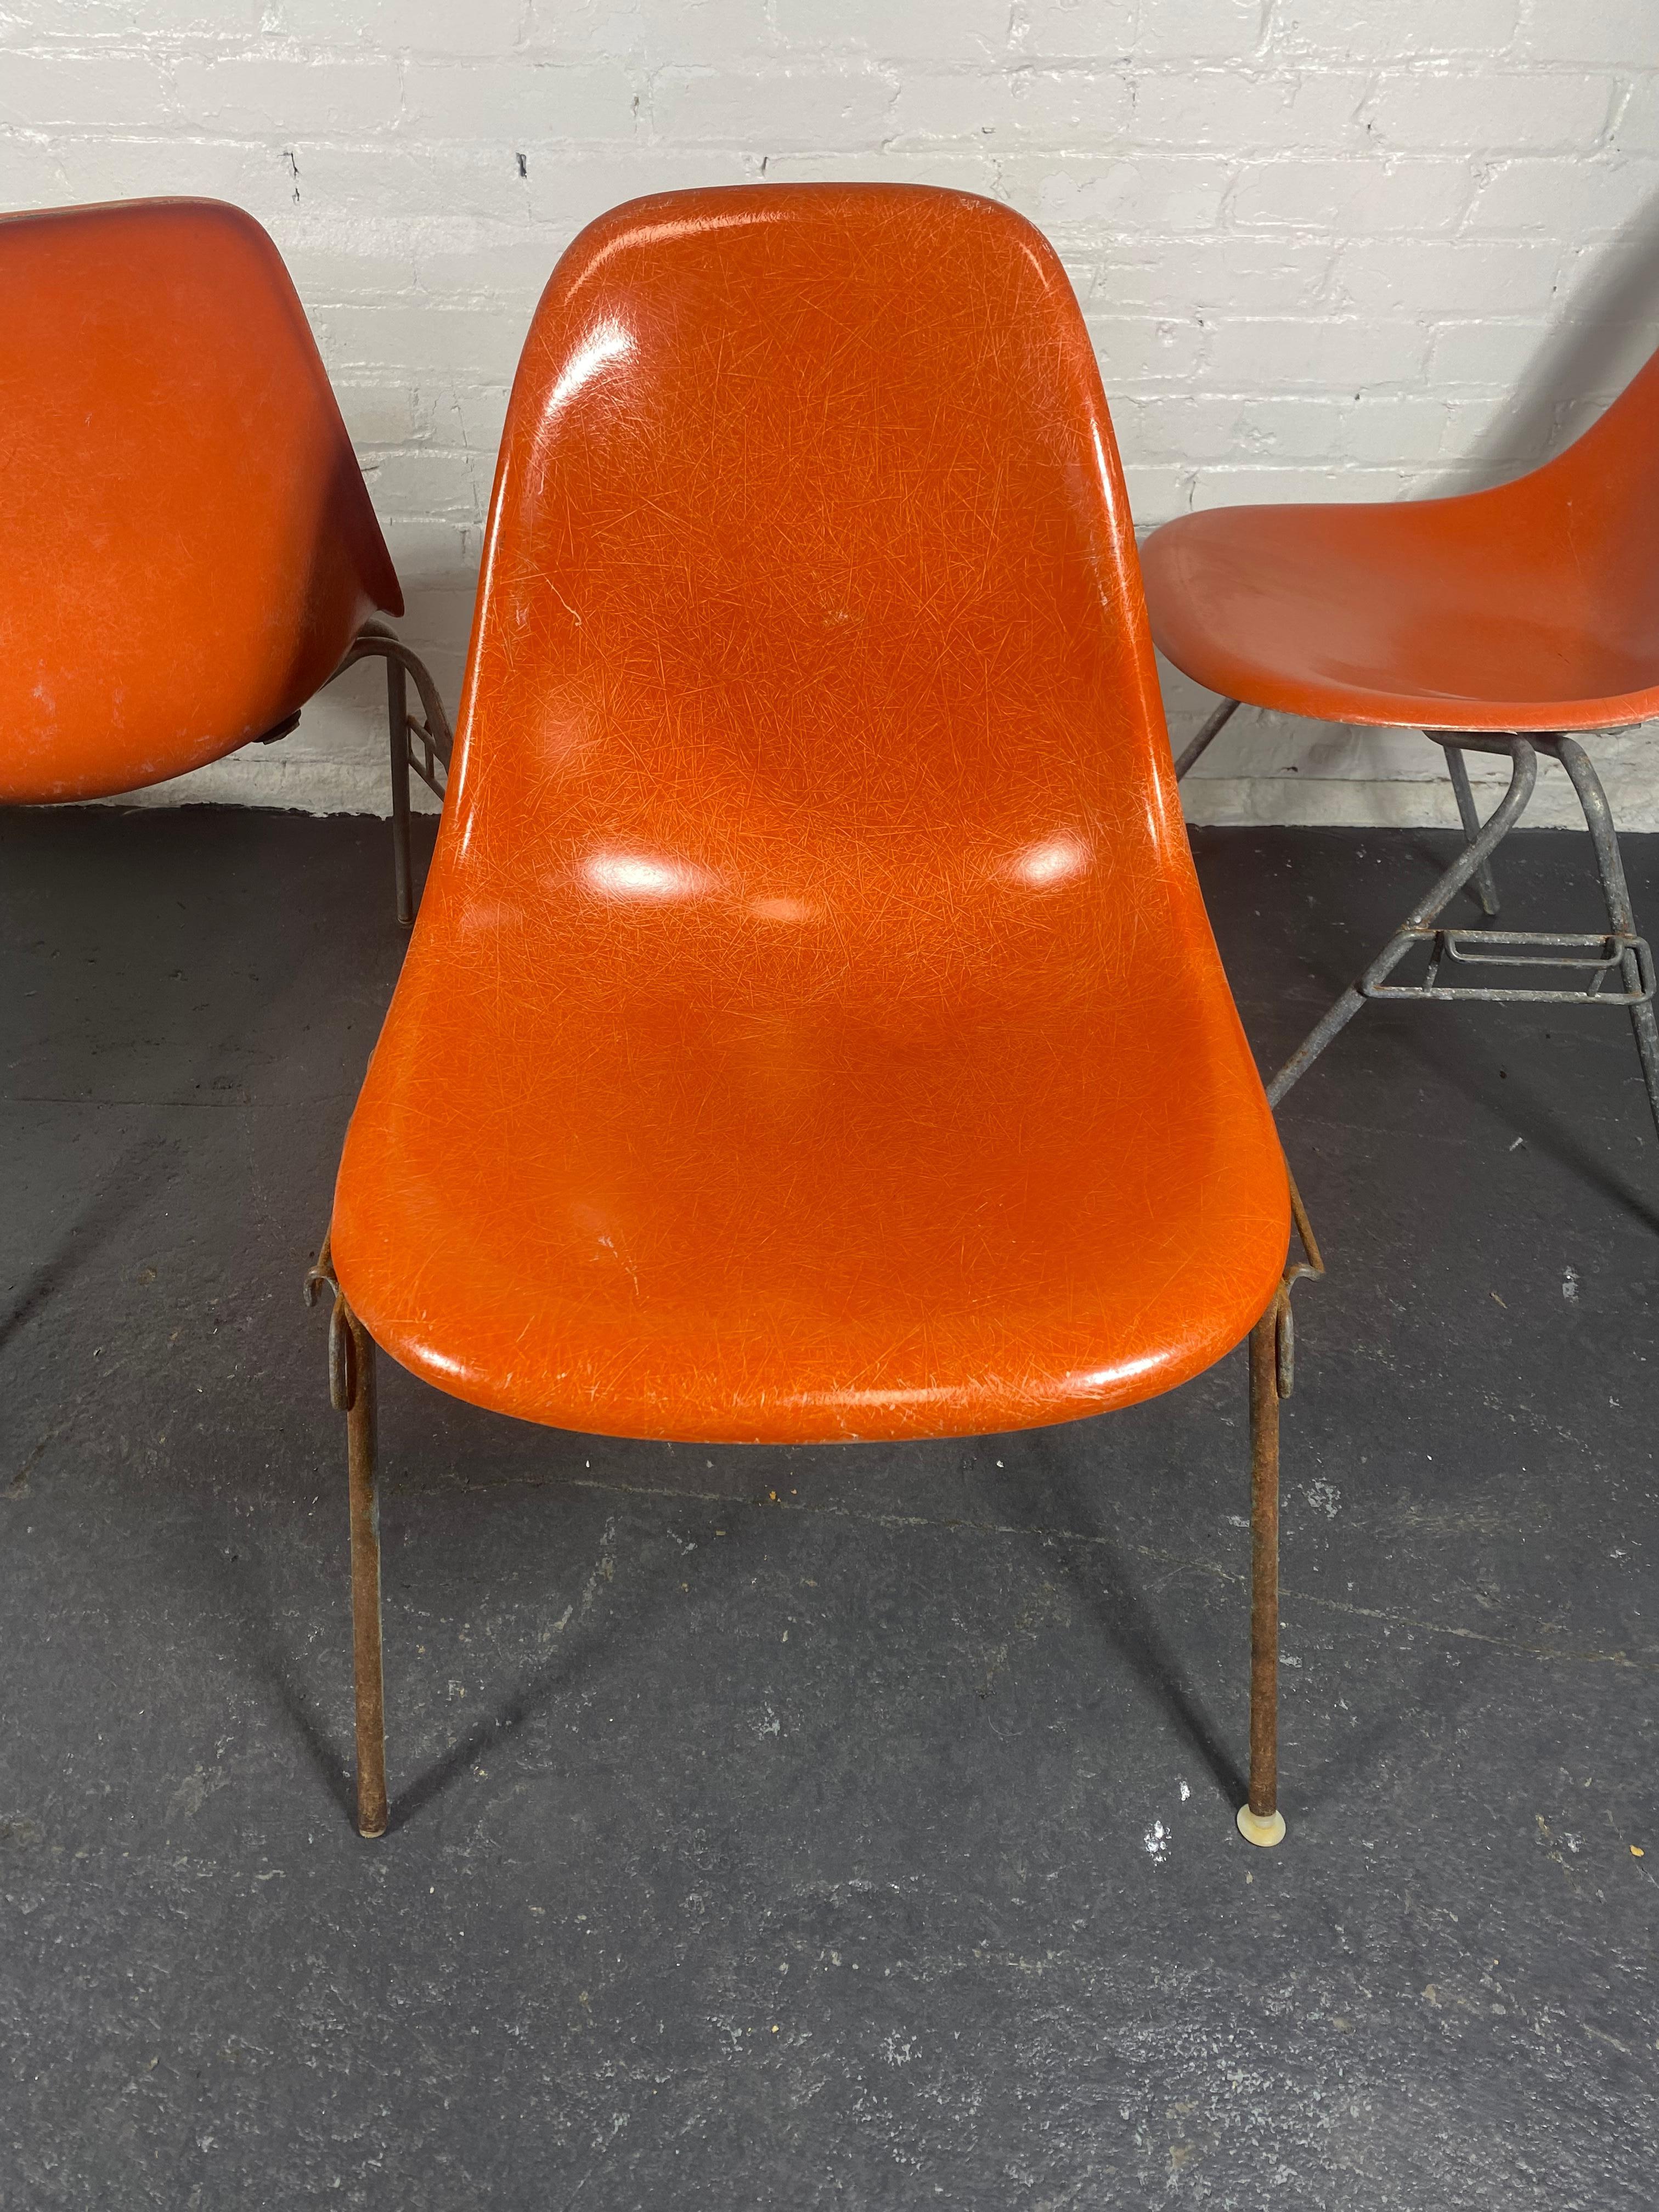 SET 4 DSS Stacking Chairs, Charles & Ray Eames, Herman Miller, Orange Fiberglass For Sale 1